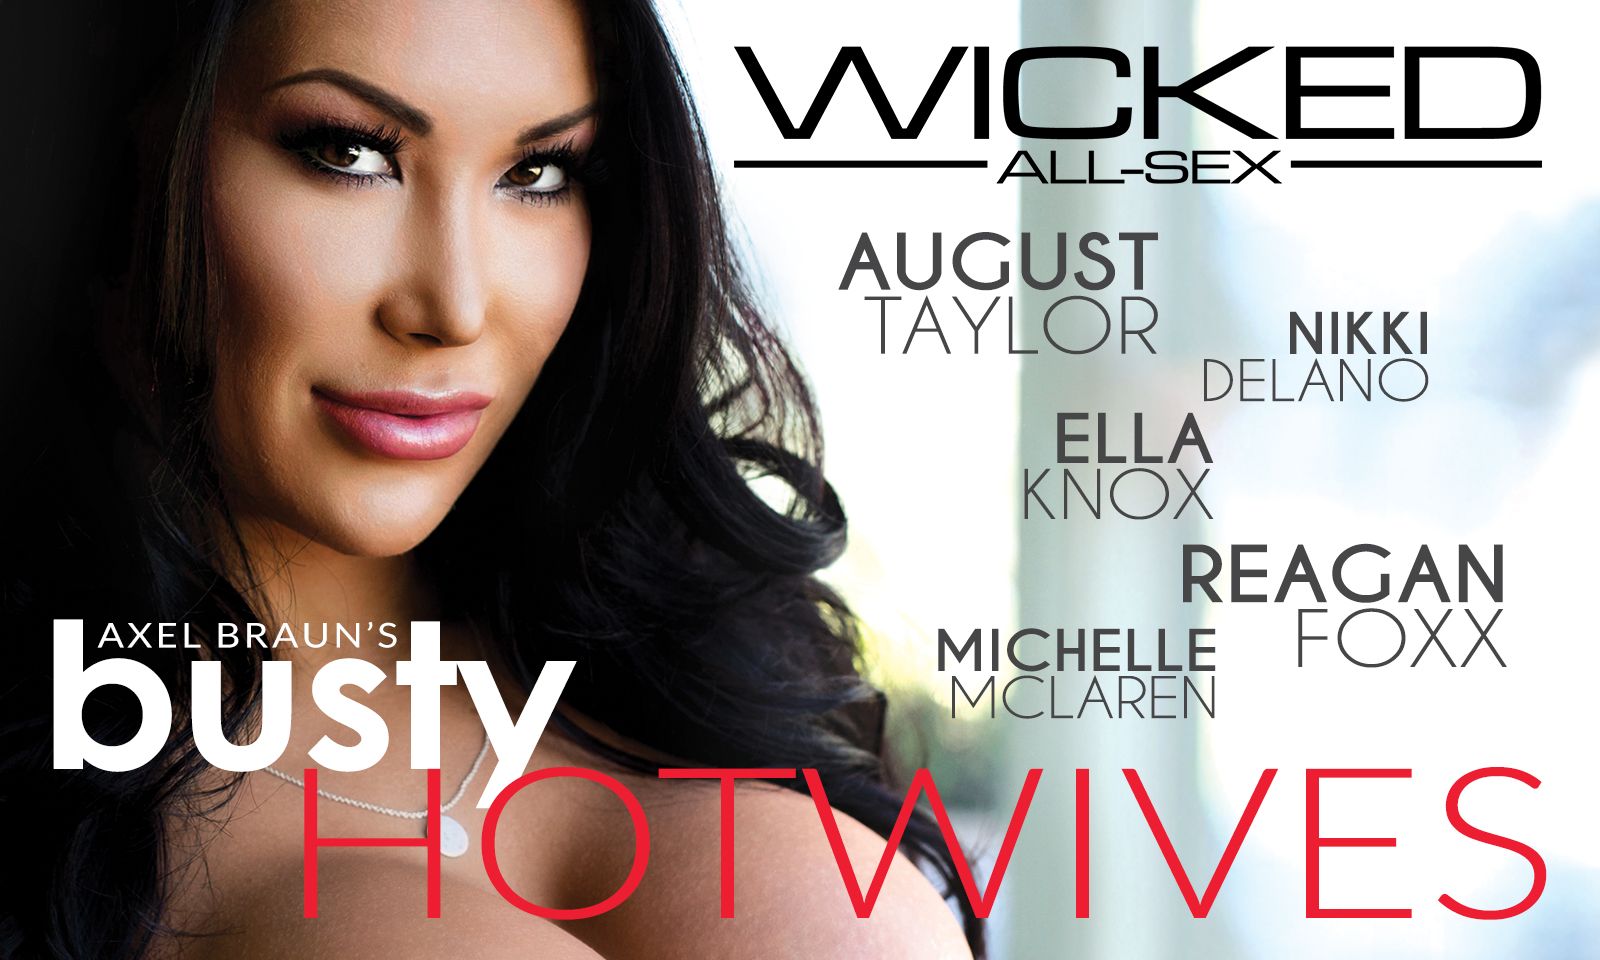 Axel Braun's Latest Salutes 'Busty Hotwives'